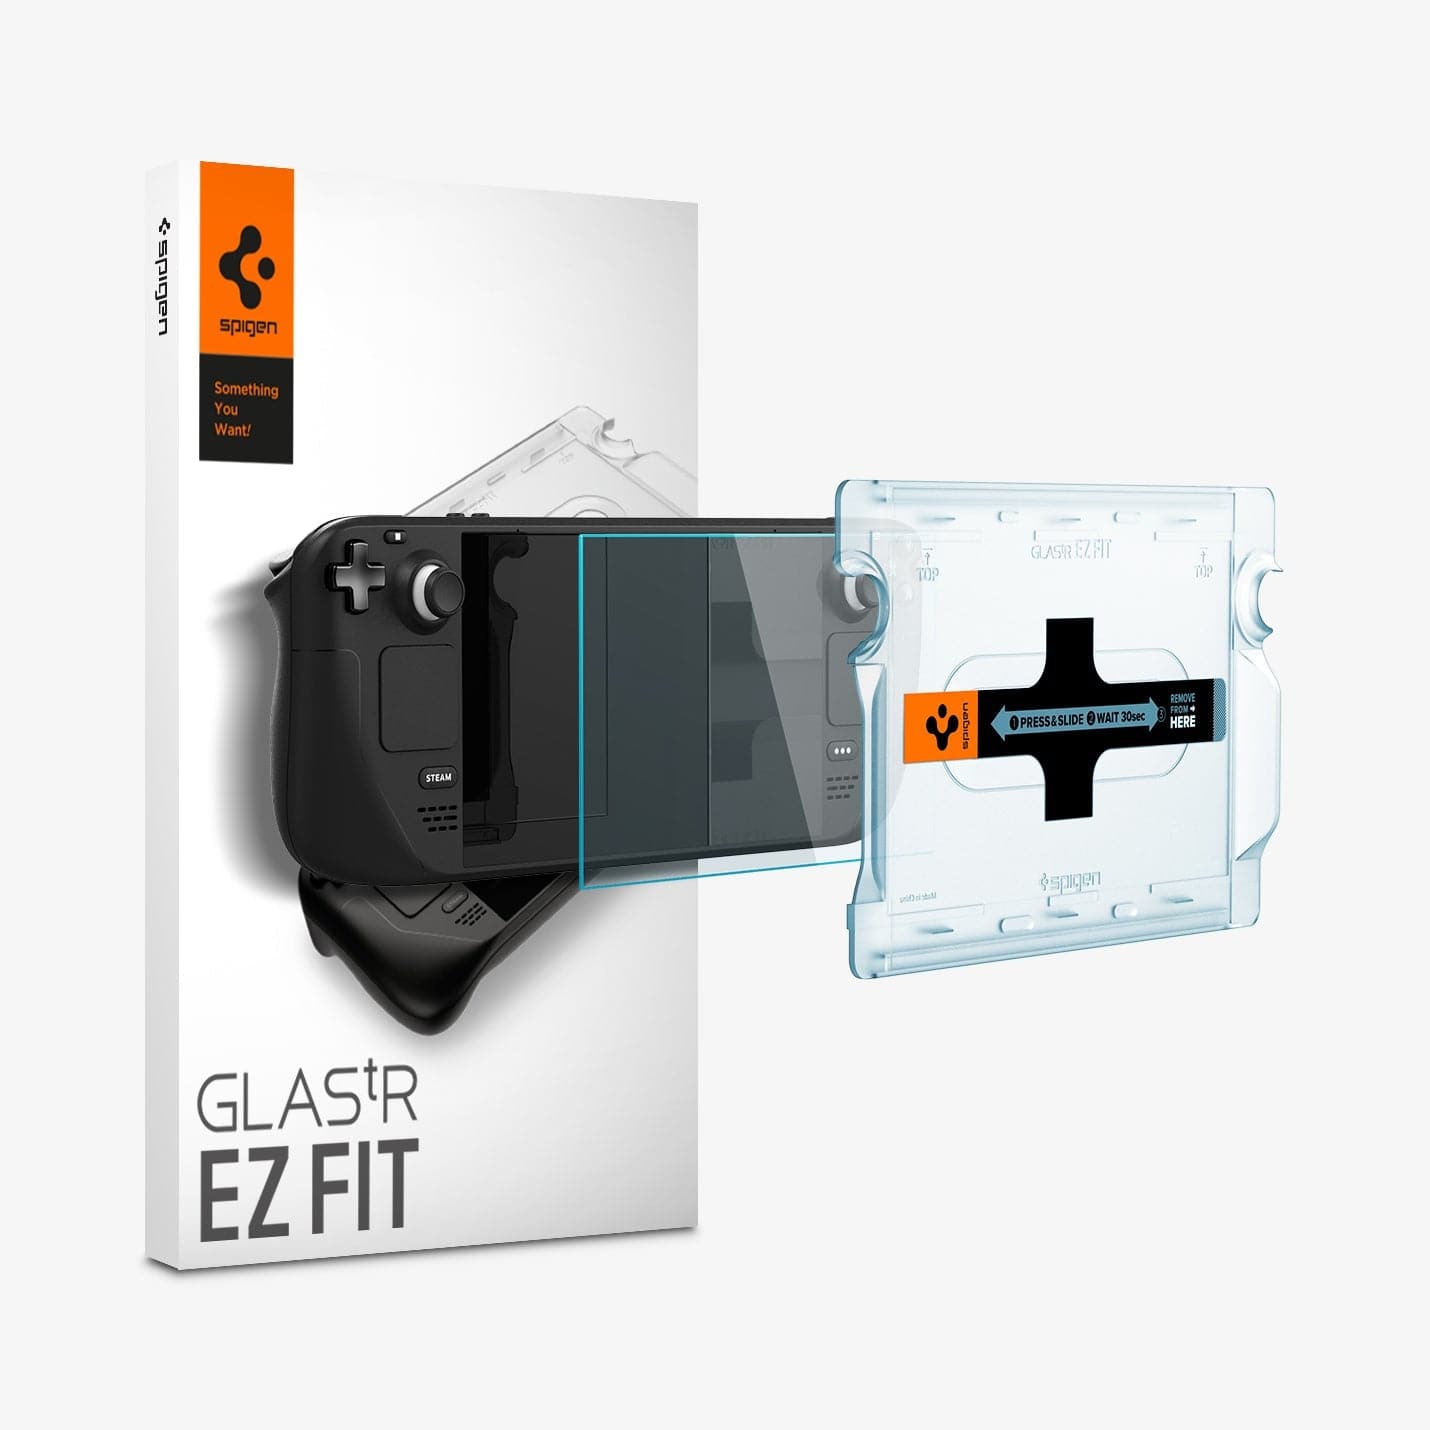 AGL05600 - Steam Deck Screen Protector EZ FIT GLAS.tR showing the device, screen protector, ez fit tray and packaging